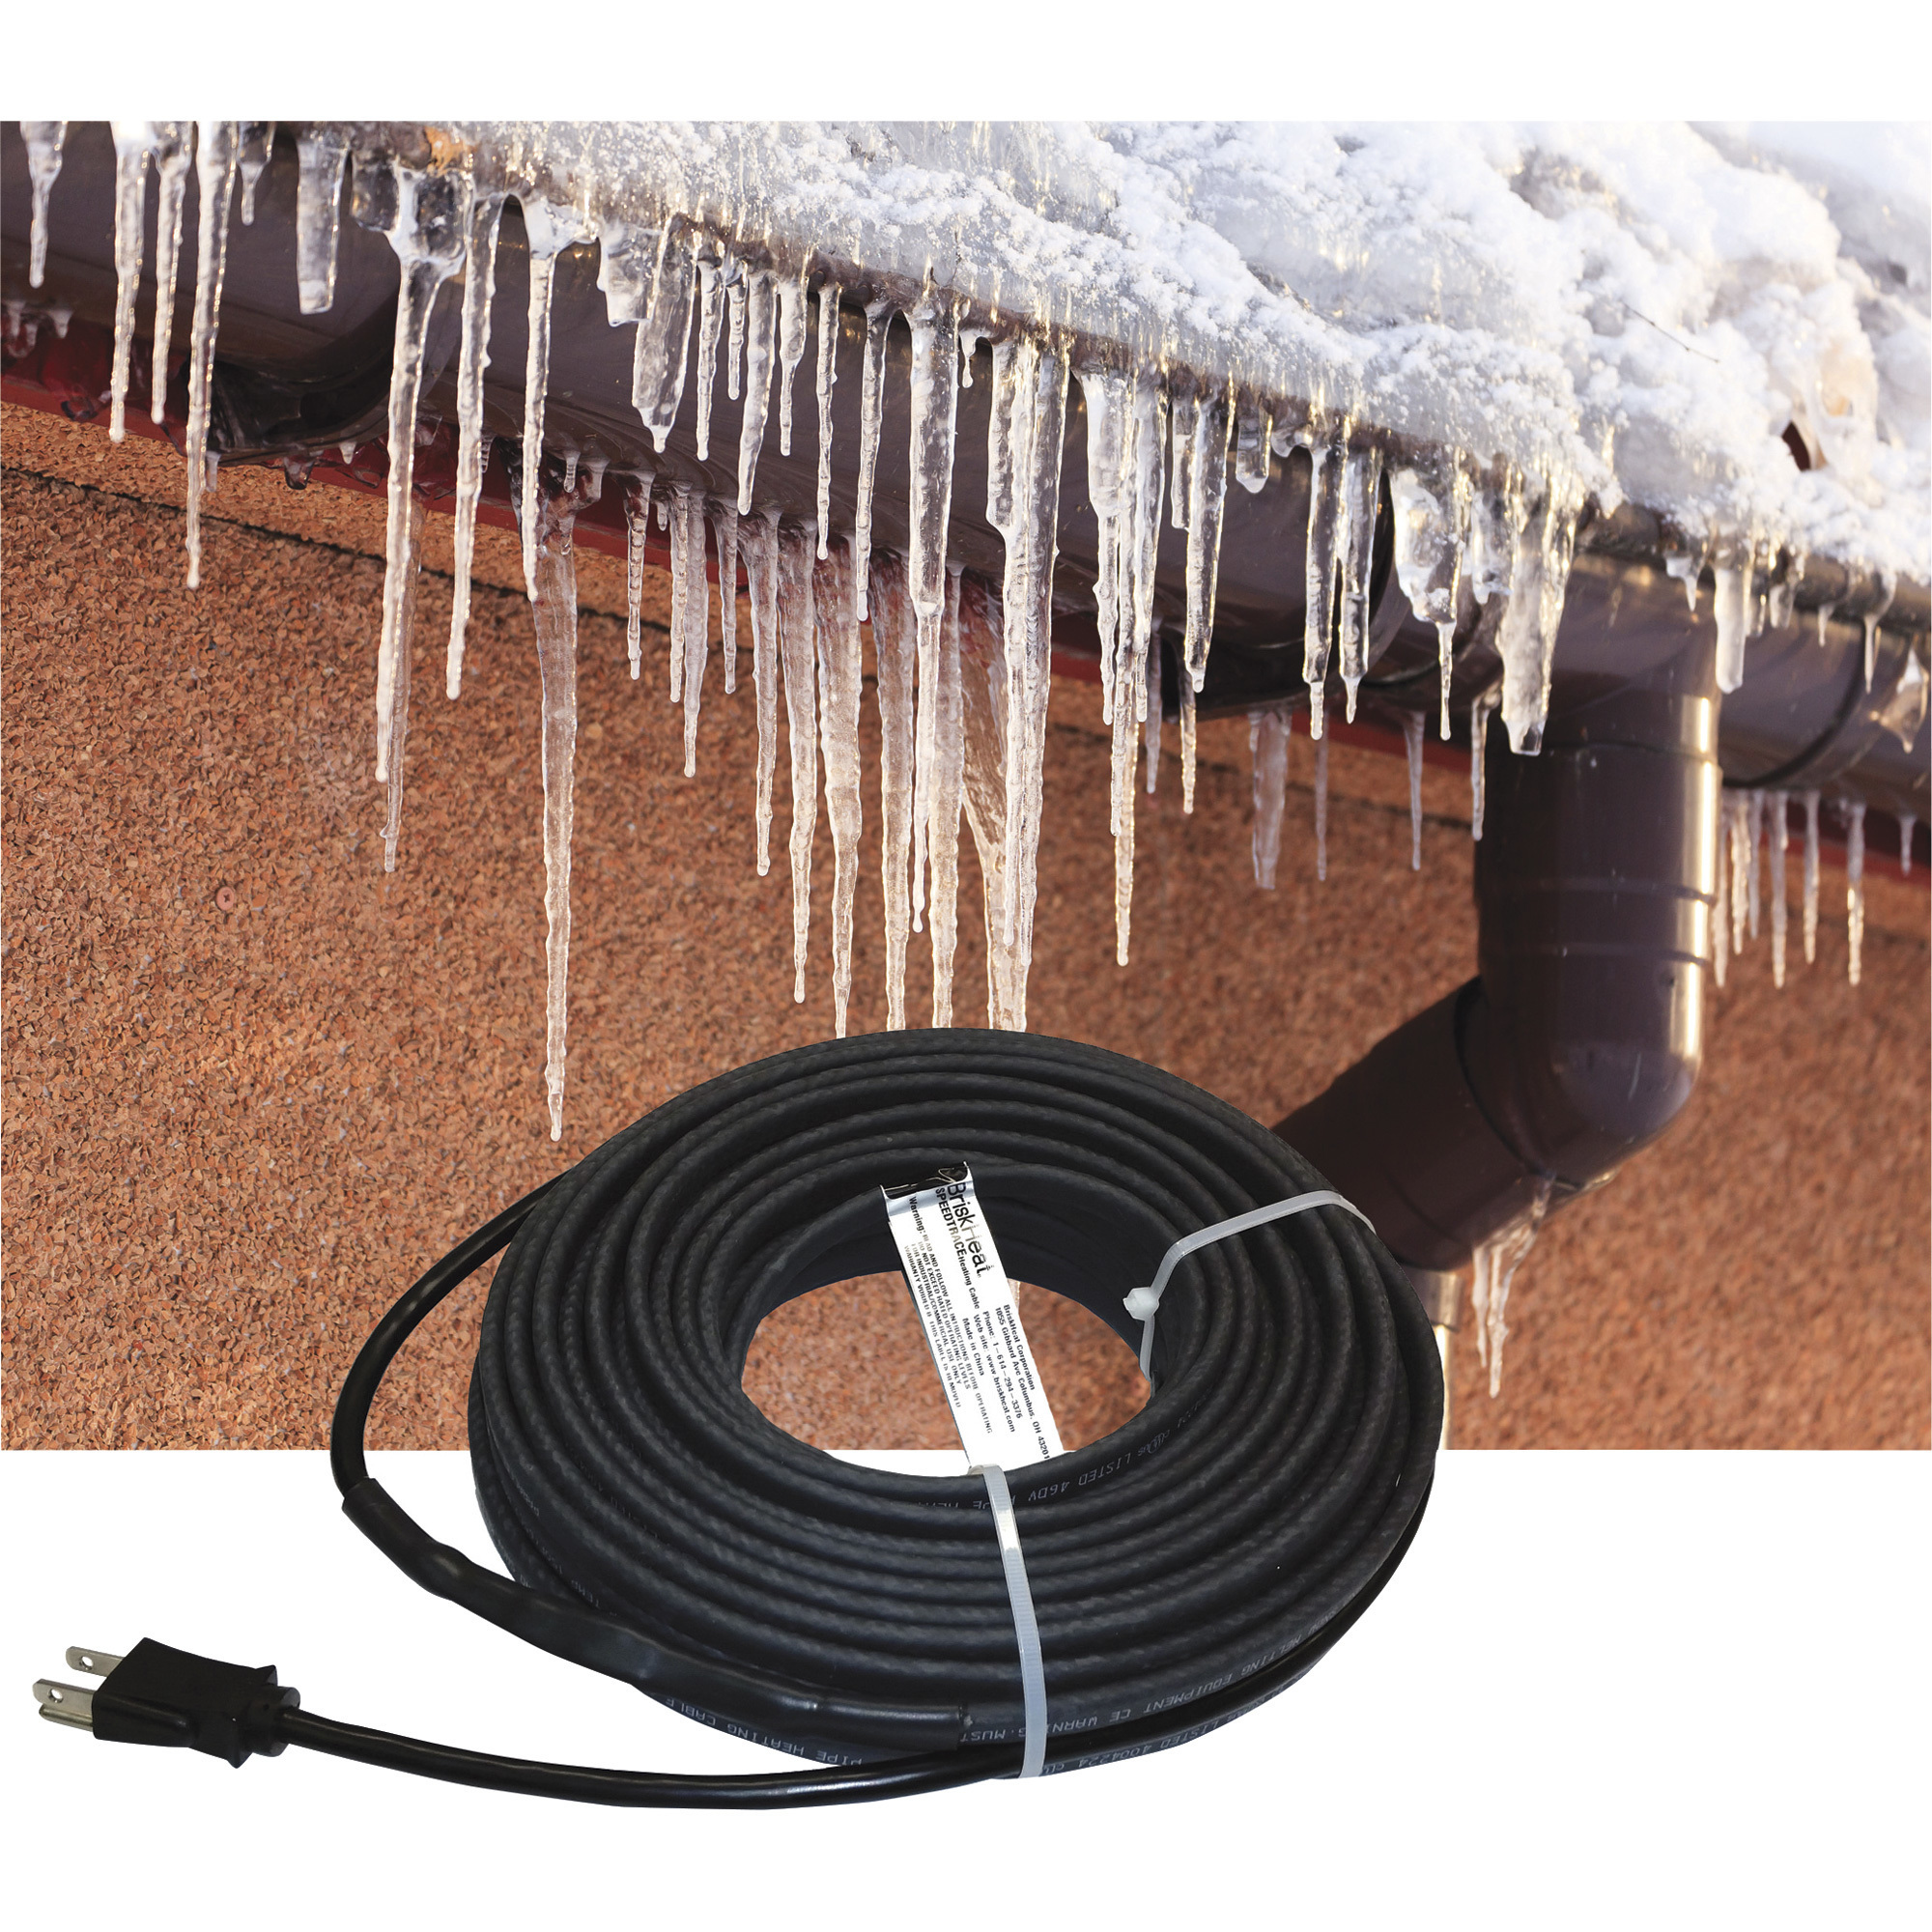 BriskHeat SpeedTrace Roof and Gutter Heating Cable Kit, 50ft.L, 5